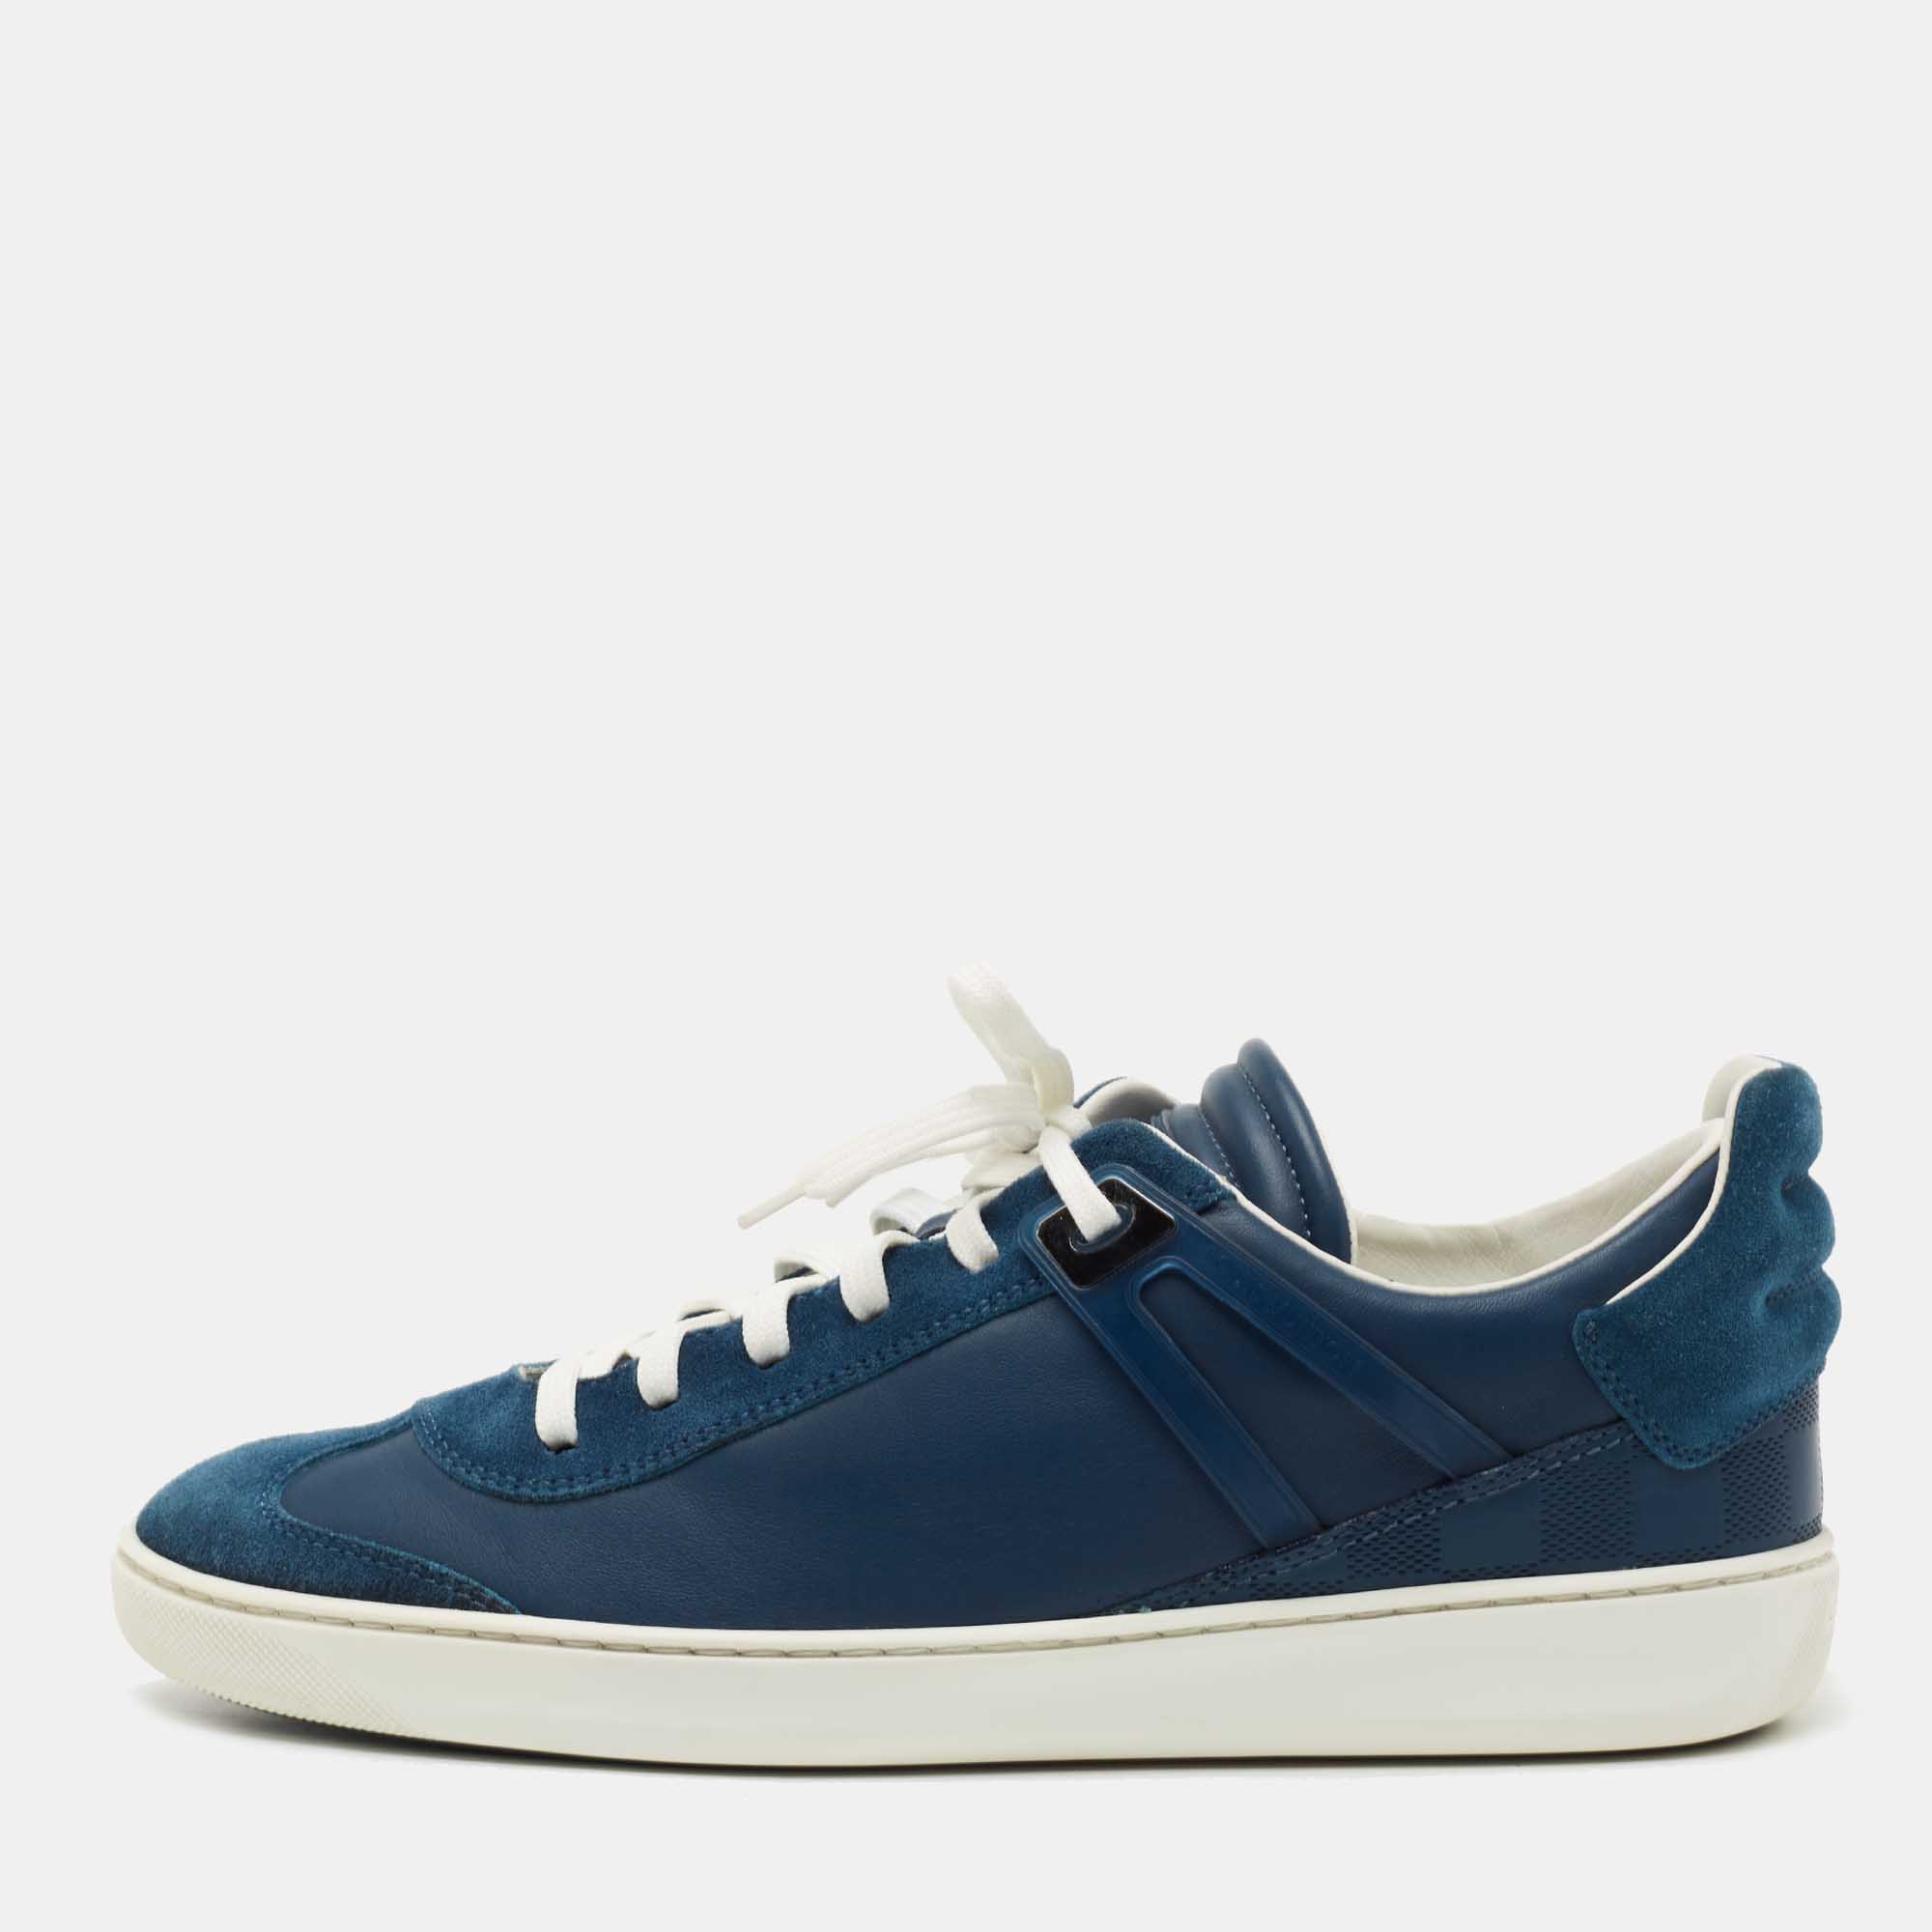 Louis vuitton blue leather and suede low top sneakers size 40.5